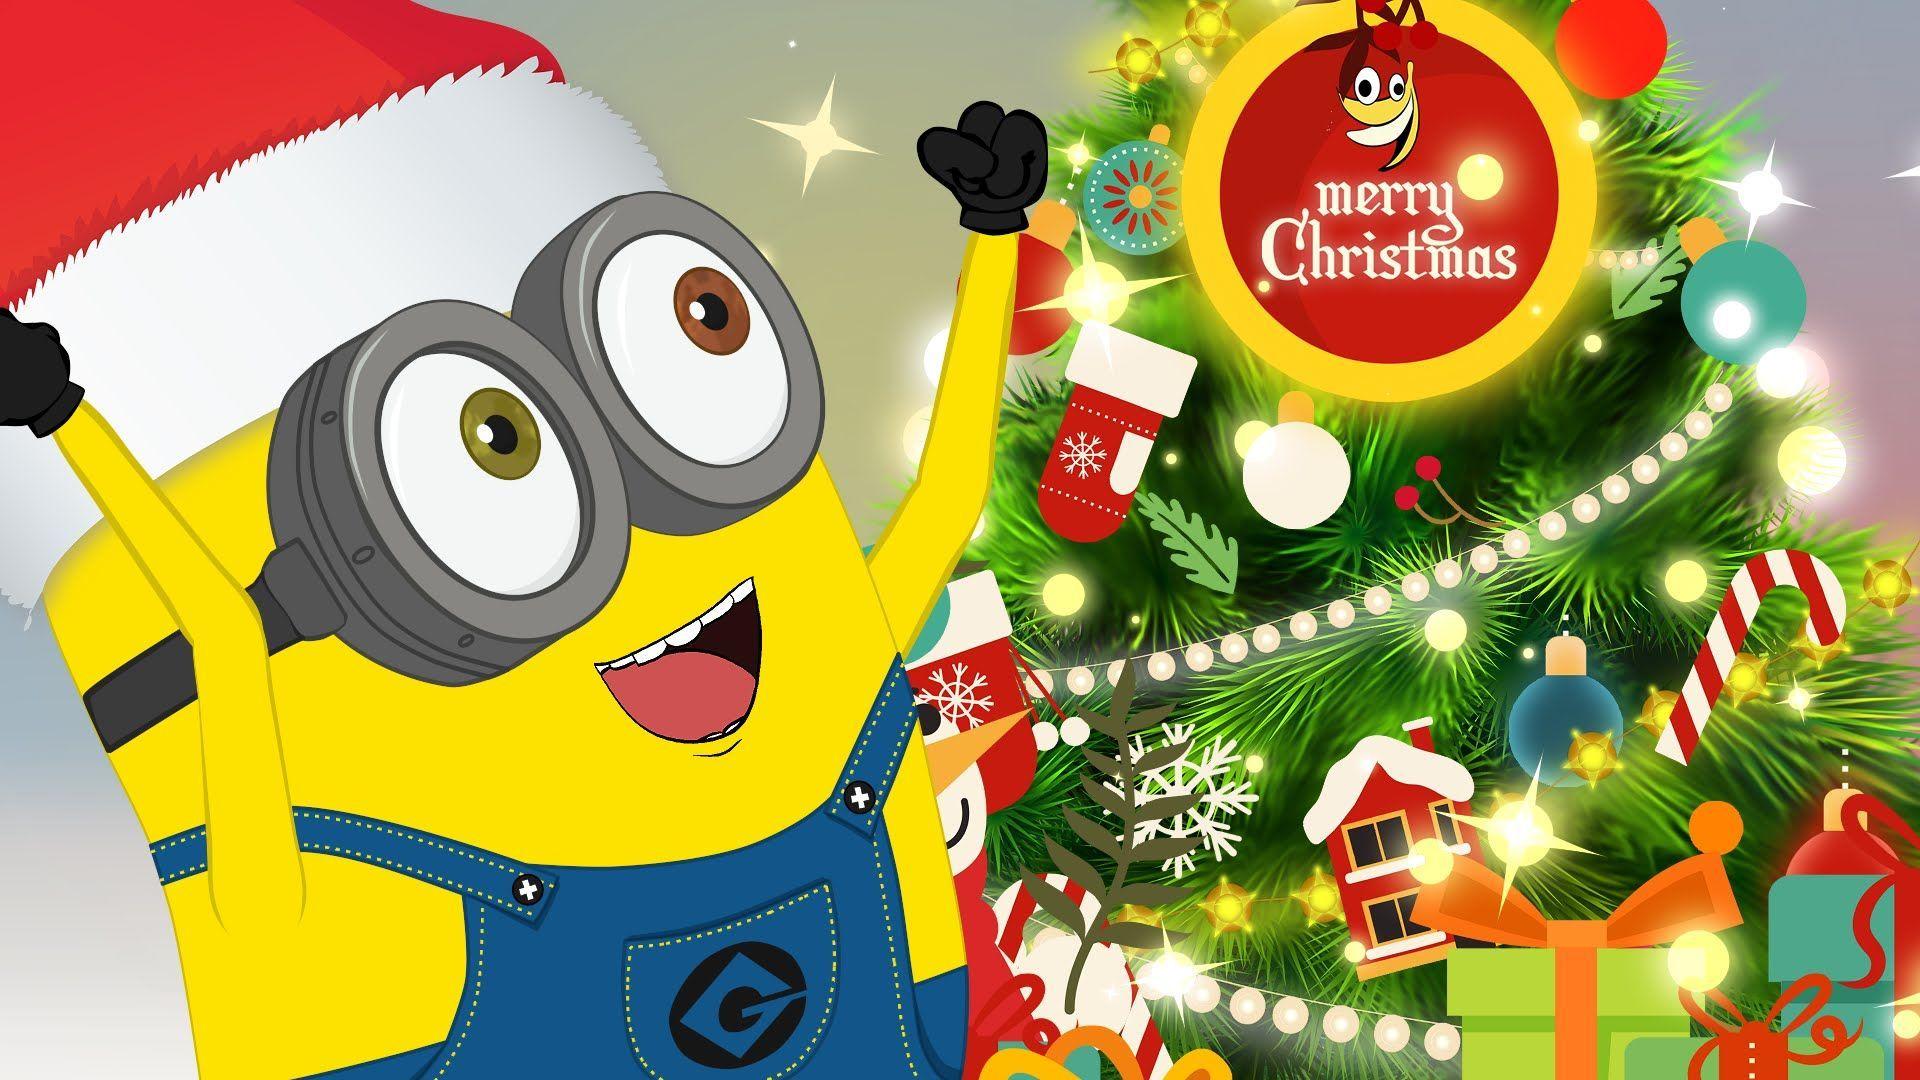 Download free minions christmas wallpaper for your mobile phone